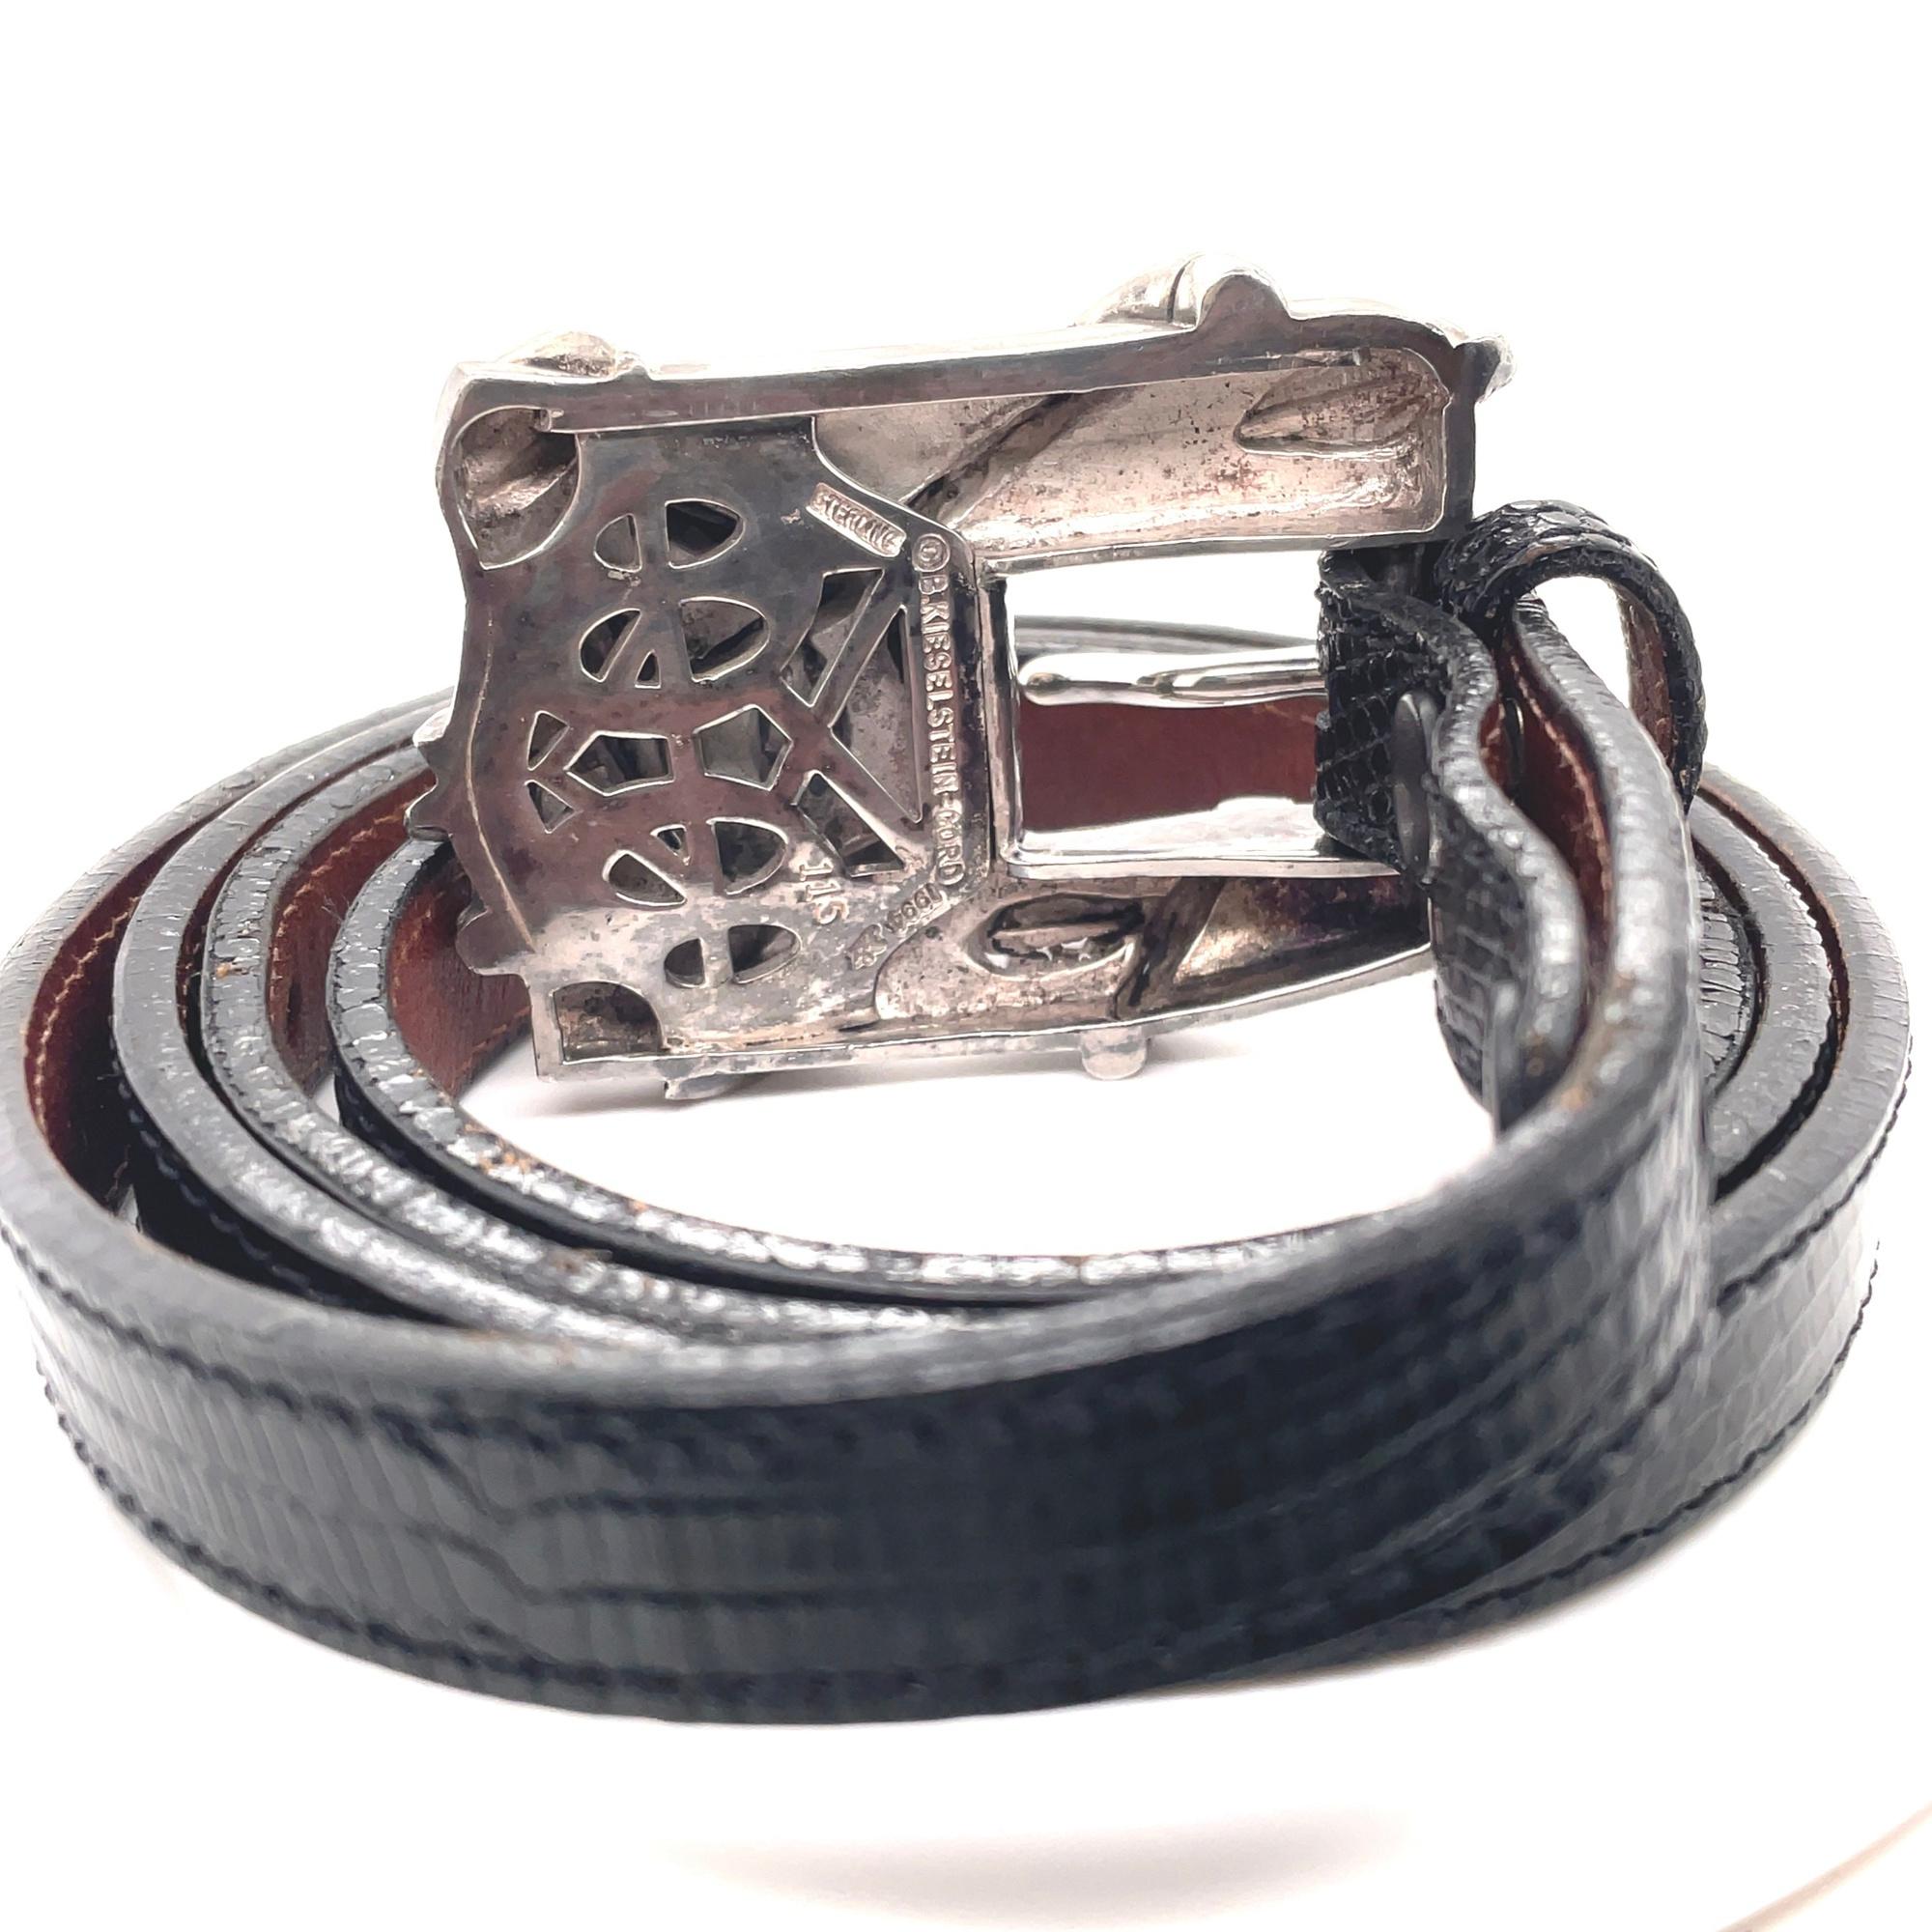 Vintage wide fancy buckle with a leather belt is one of Kieselstein-Cord's early and popular designs. This vintage wide fancy buckle with leaves design comes in silver tone hardware with a slim black leather belt. Buckle measurements: 2.5 inches x